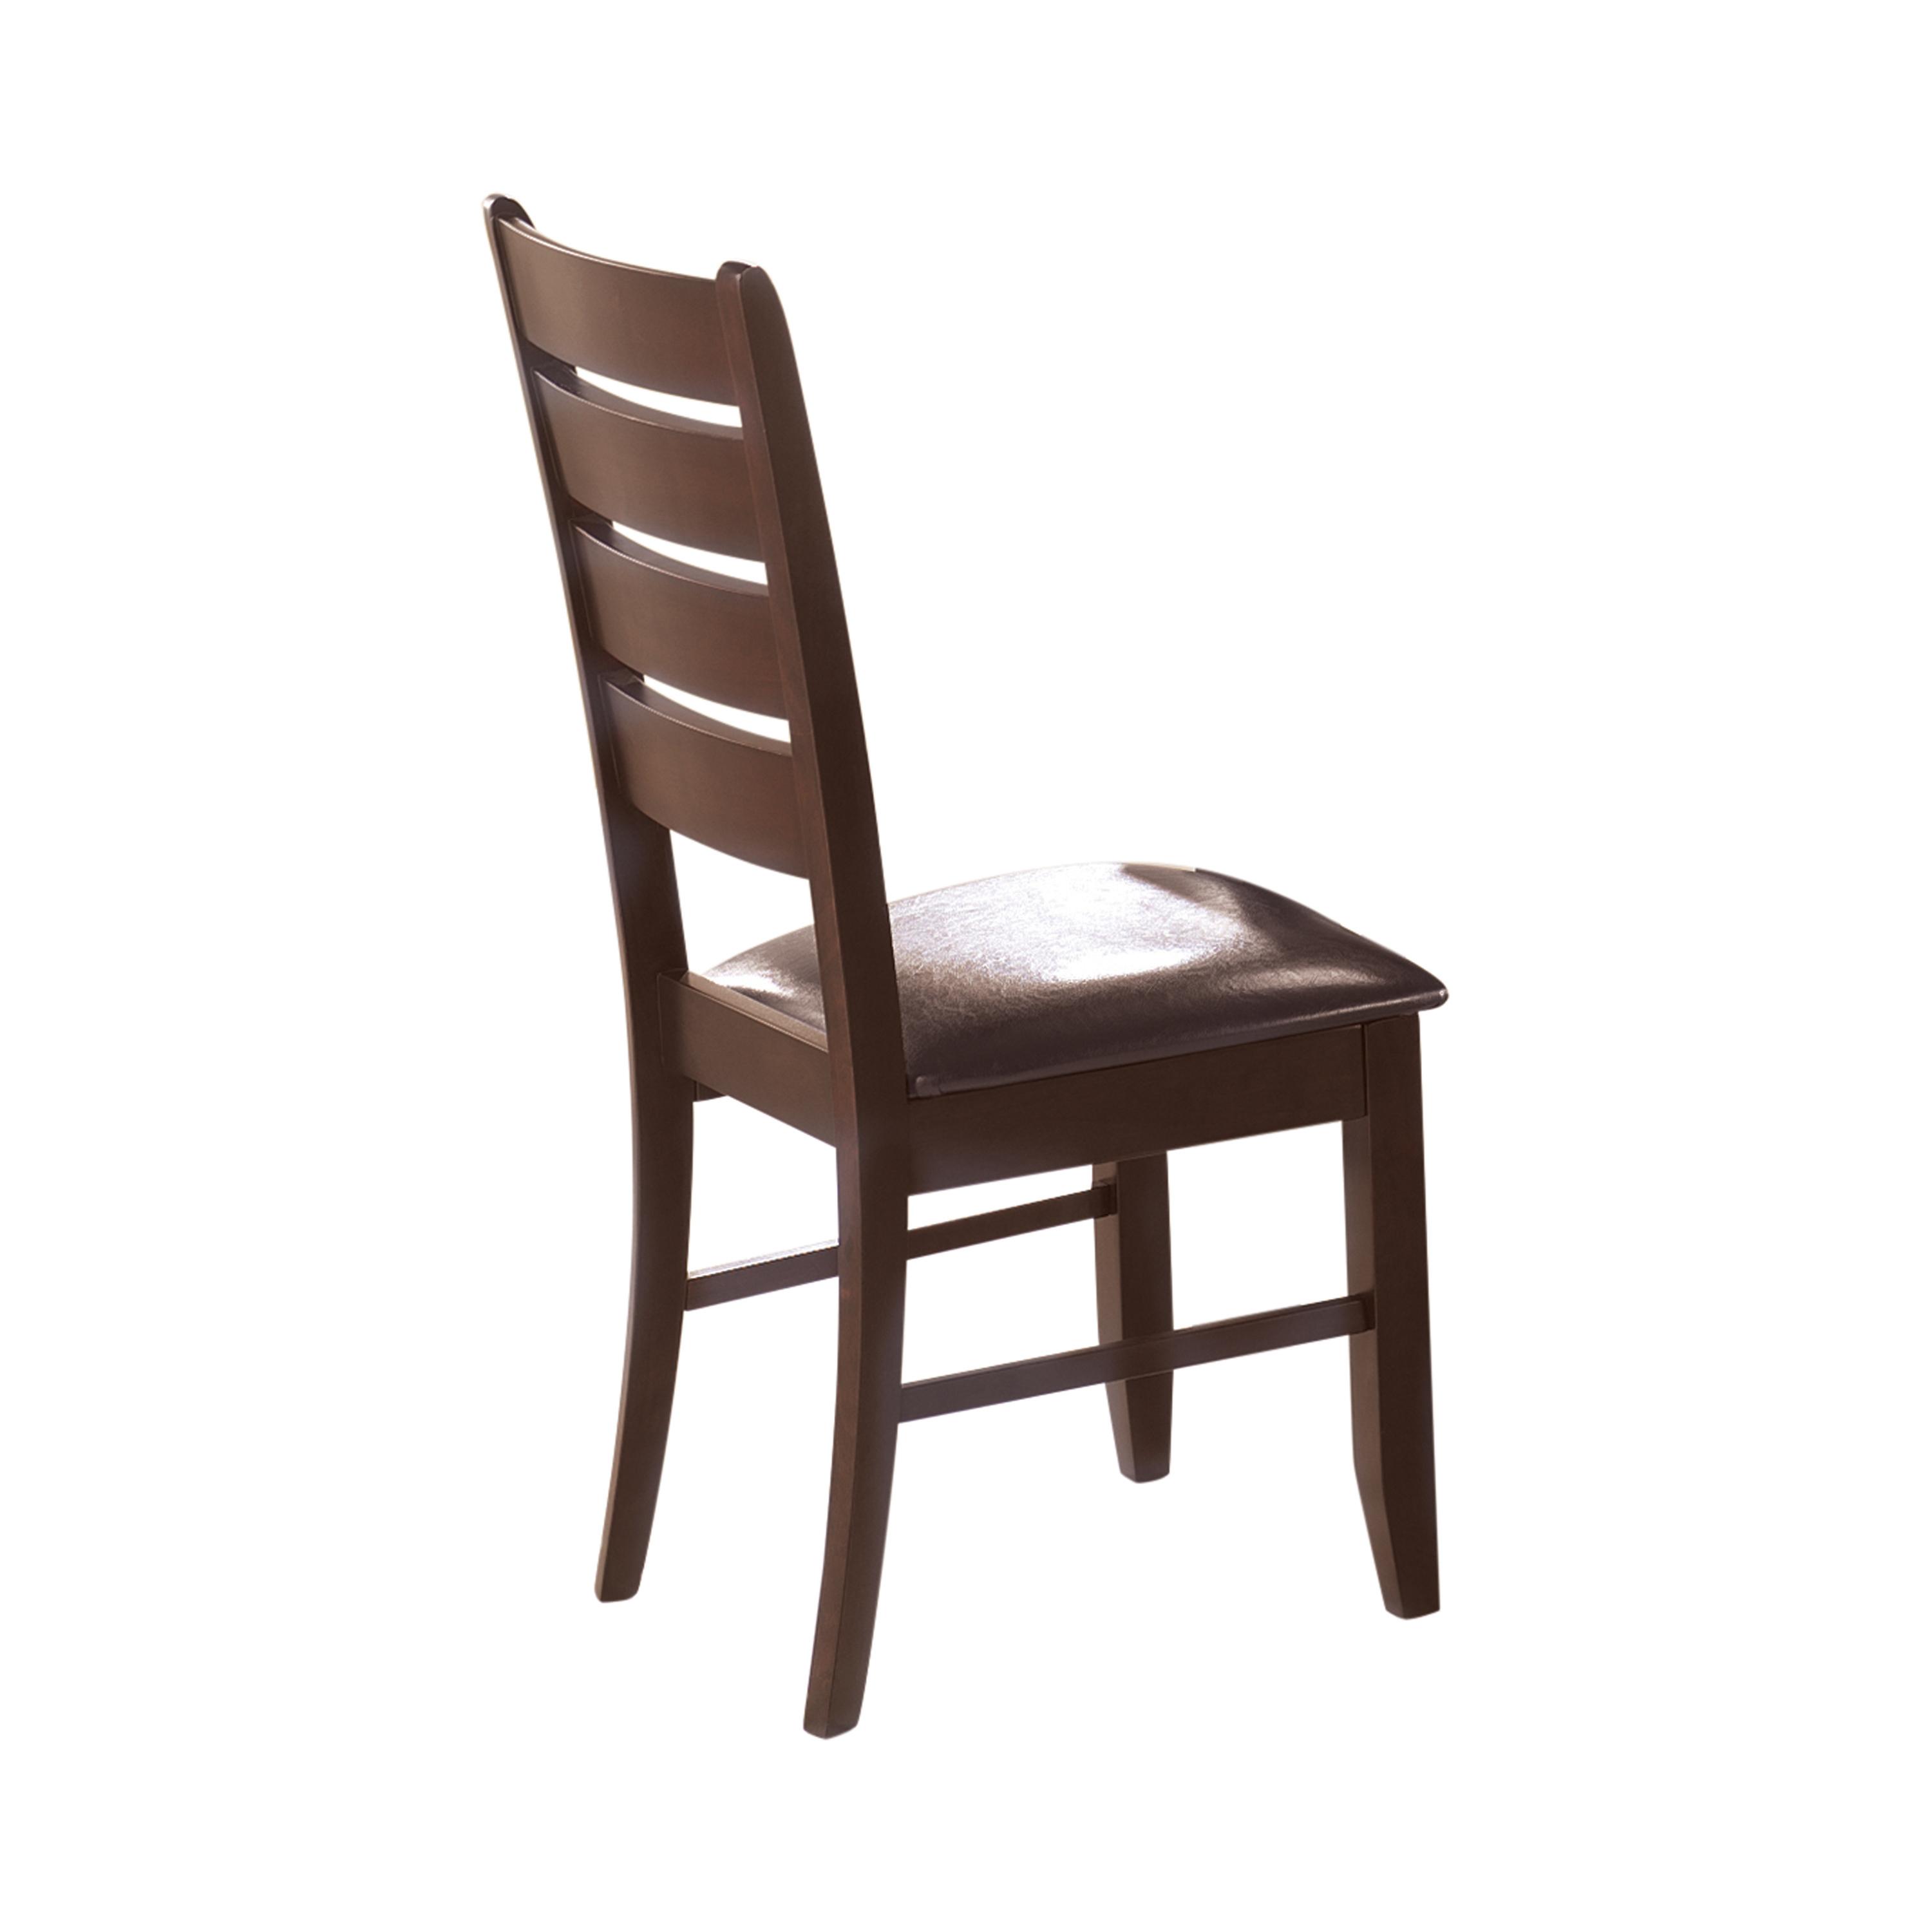 Modern Side Chair Set 102722 Dalila 102722 in Cappuccino Leatherette